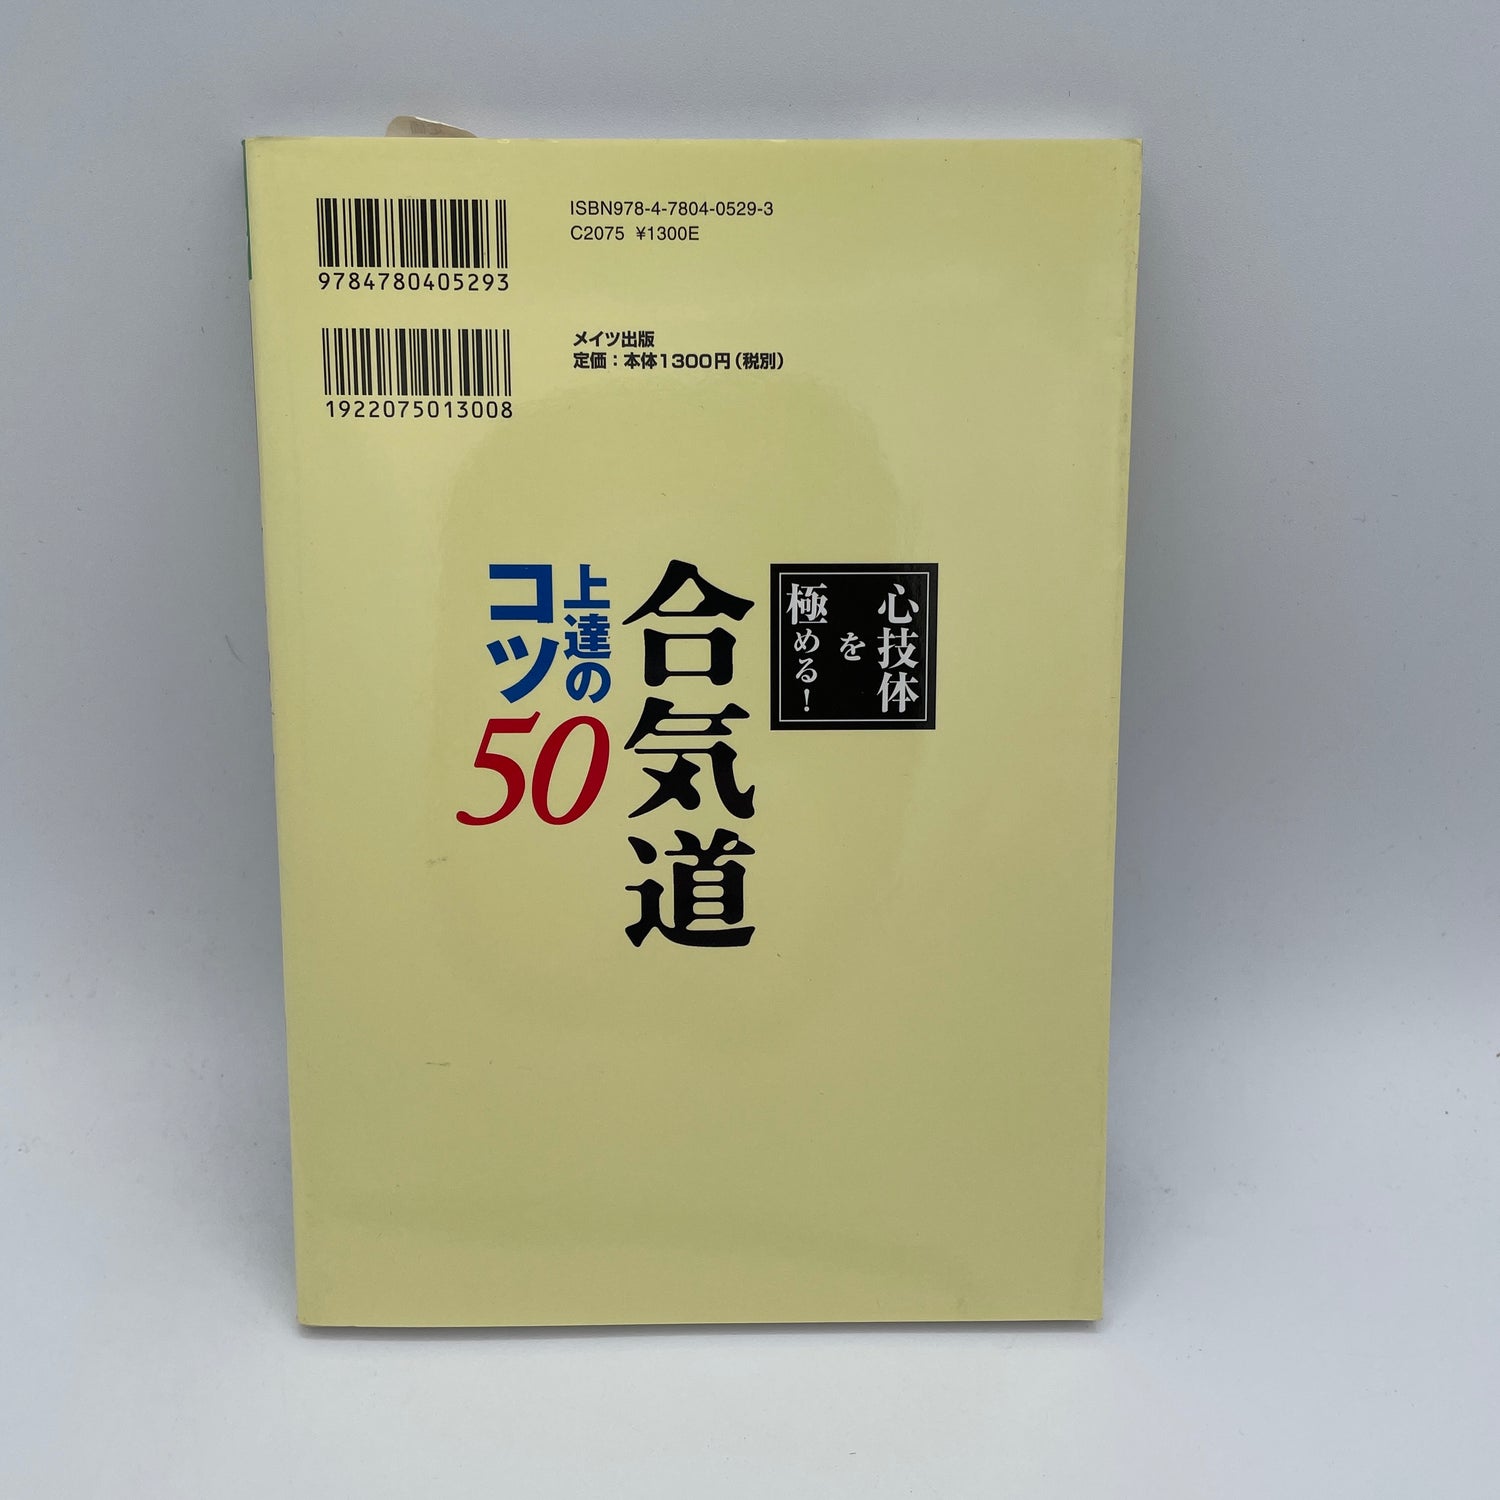 50 Tips for Improving Your Aikido Book by Yasuhisa Shioda